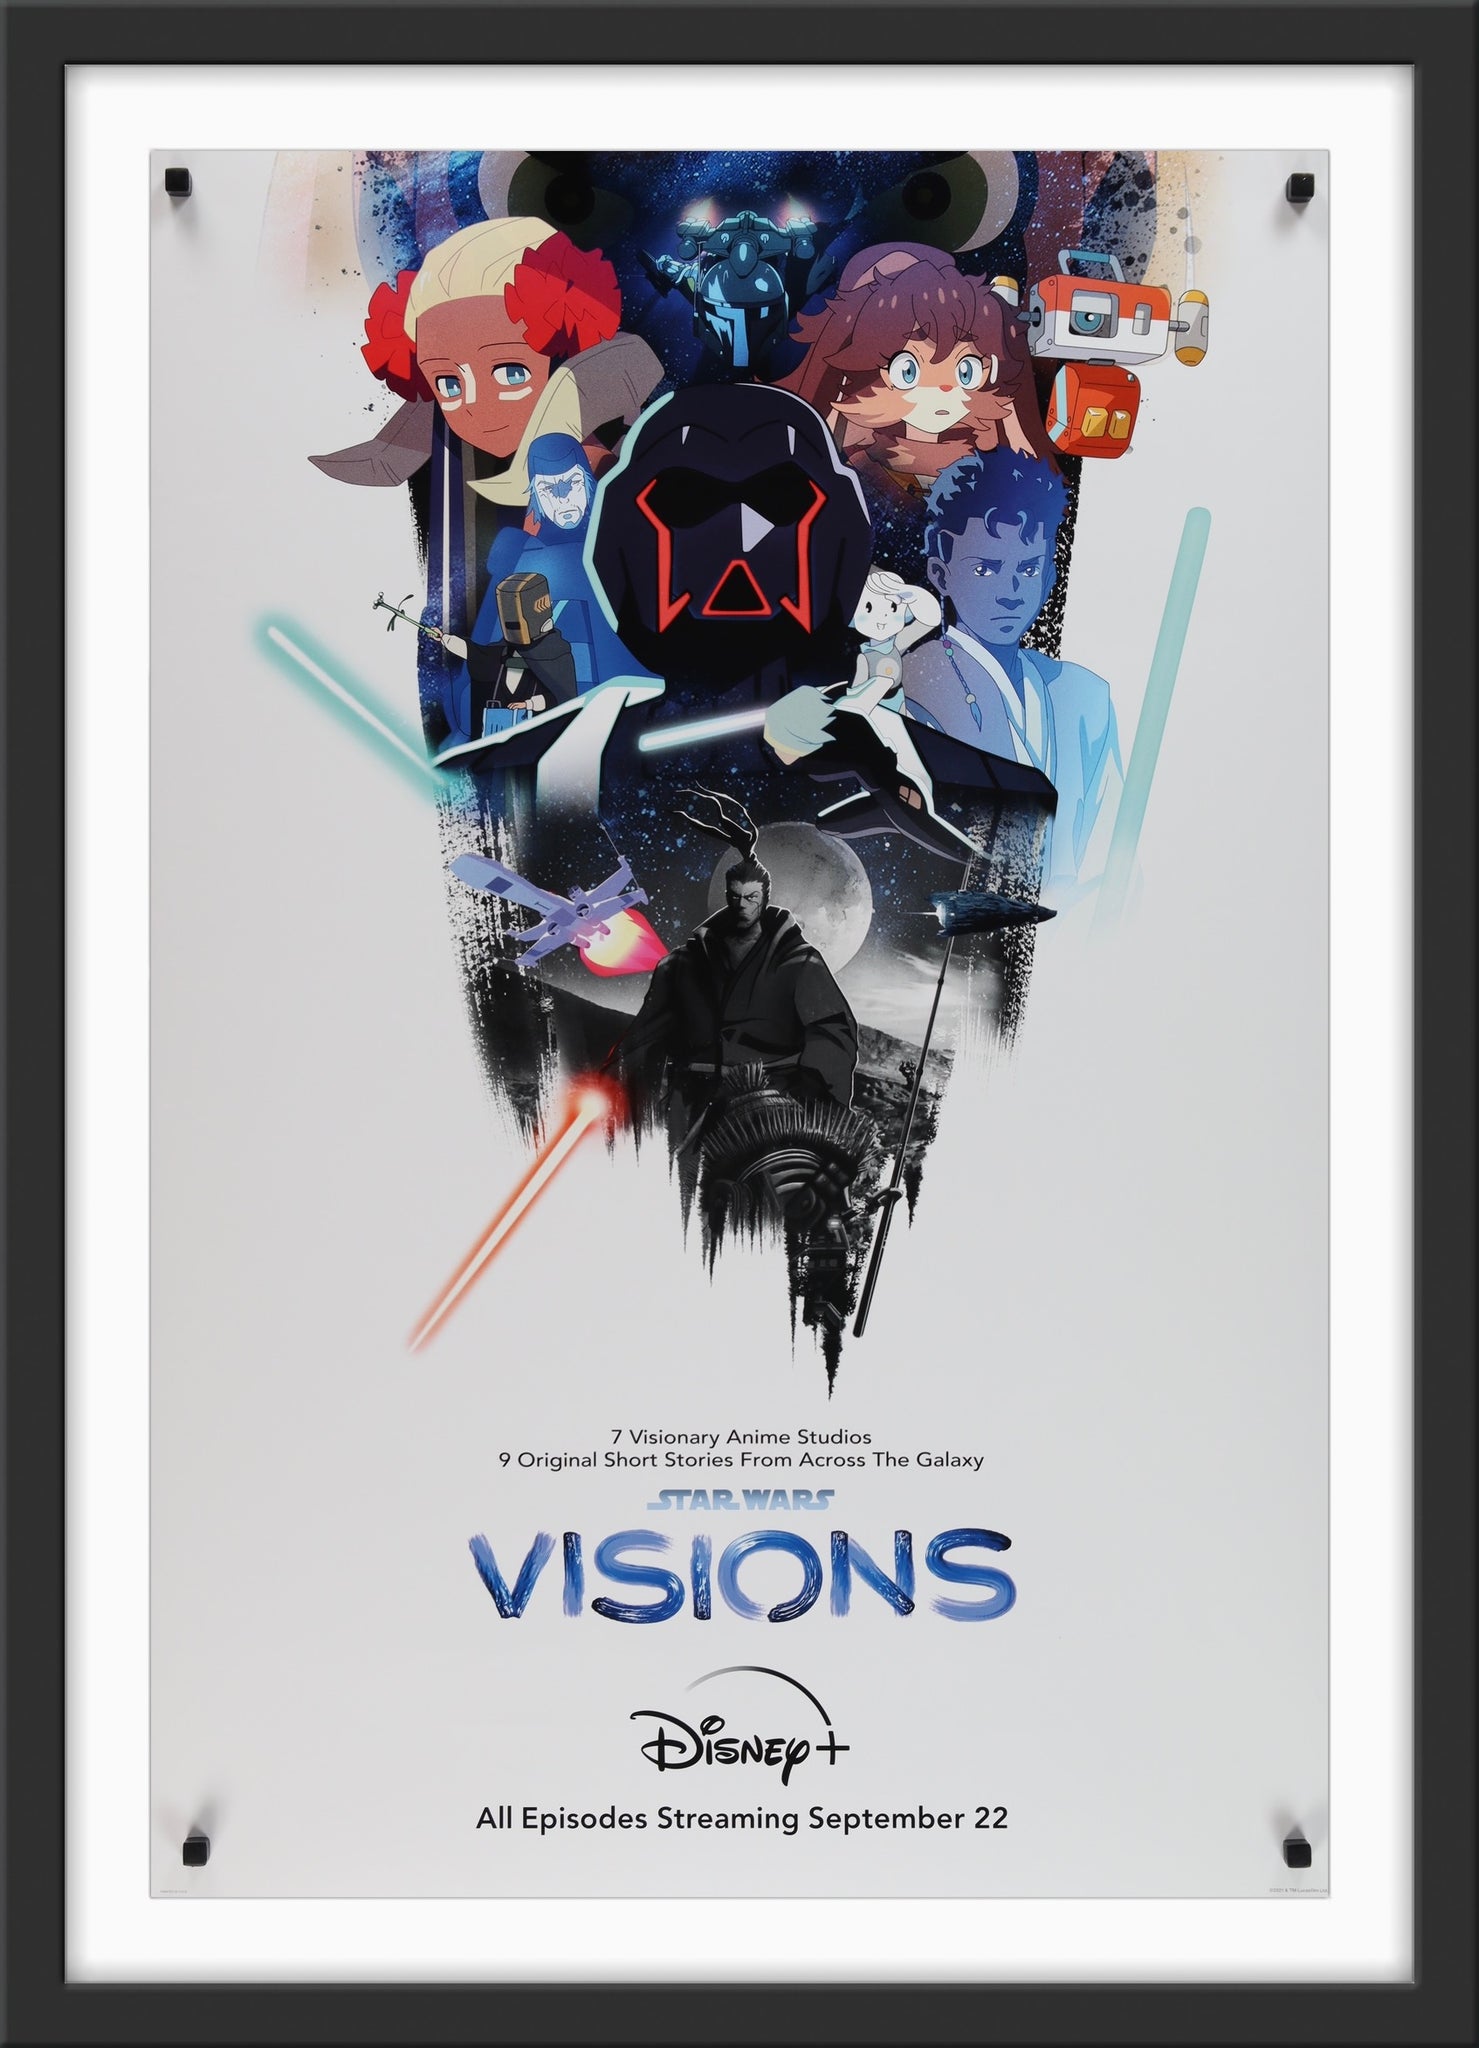 Check Out the Official, Beautiful Star Wars: Visions Poster